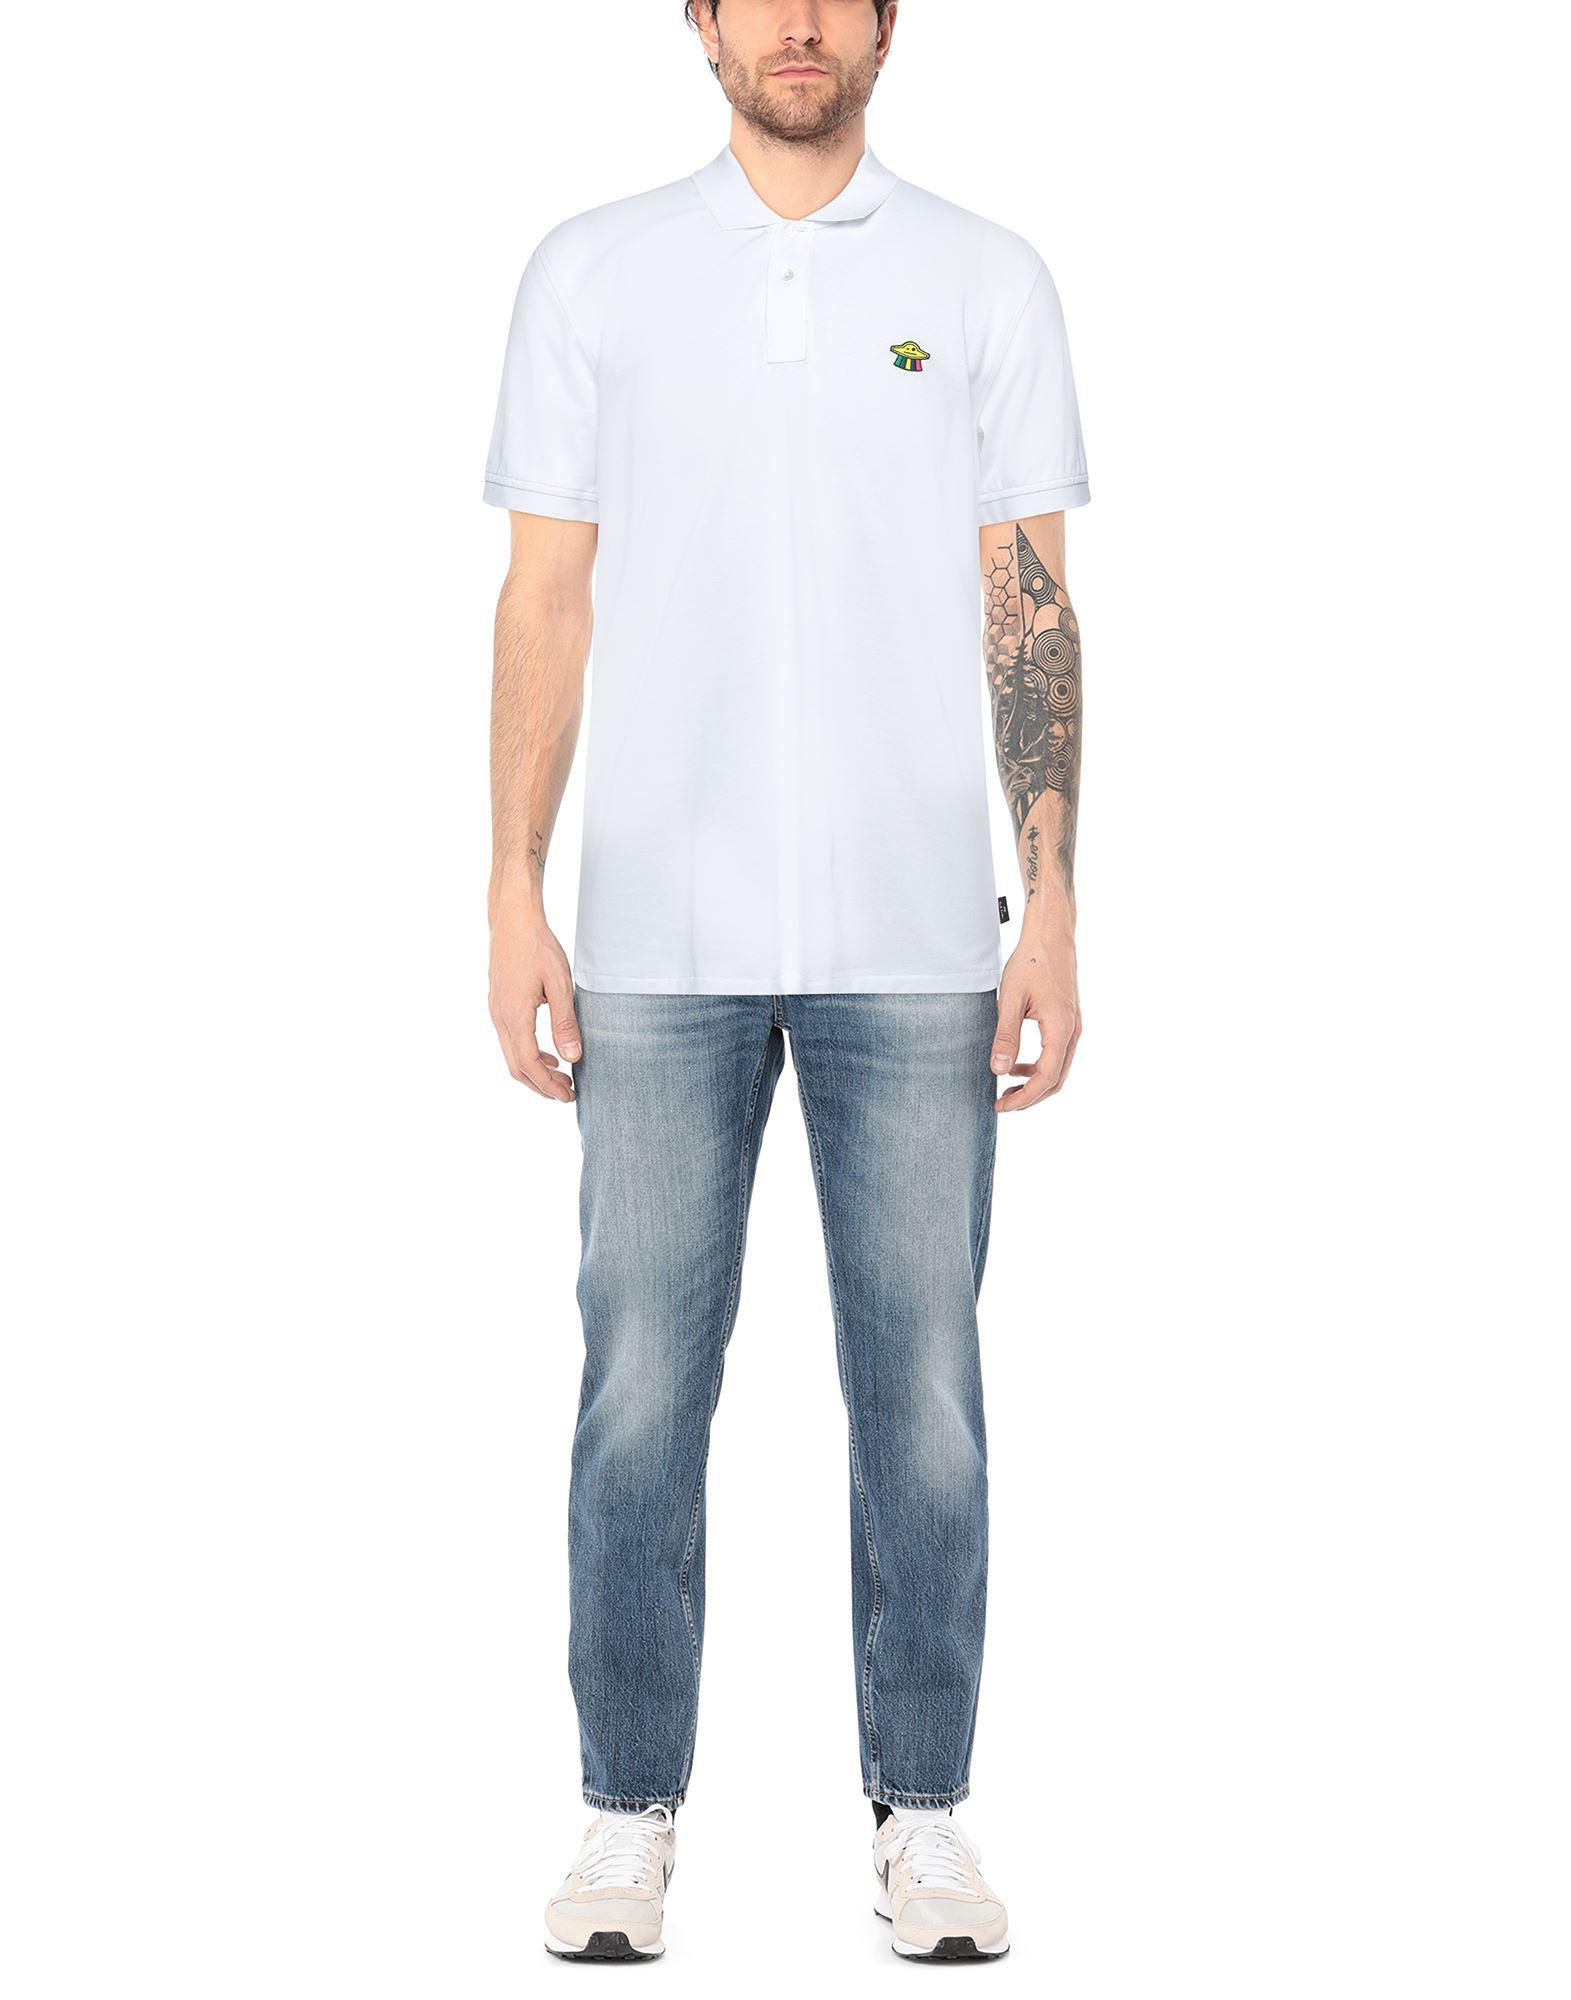 PS by Paul Smith Polo Shirt in White for Men - Lyst